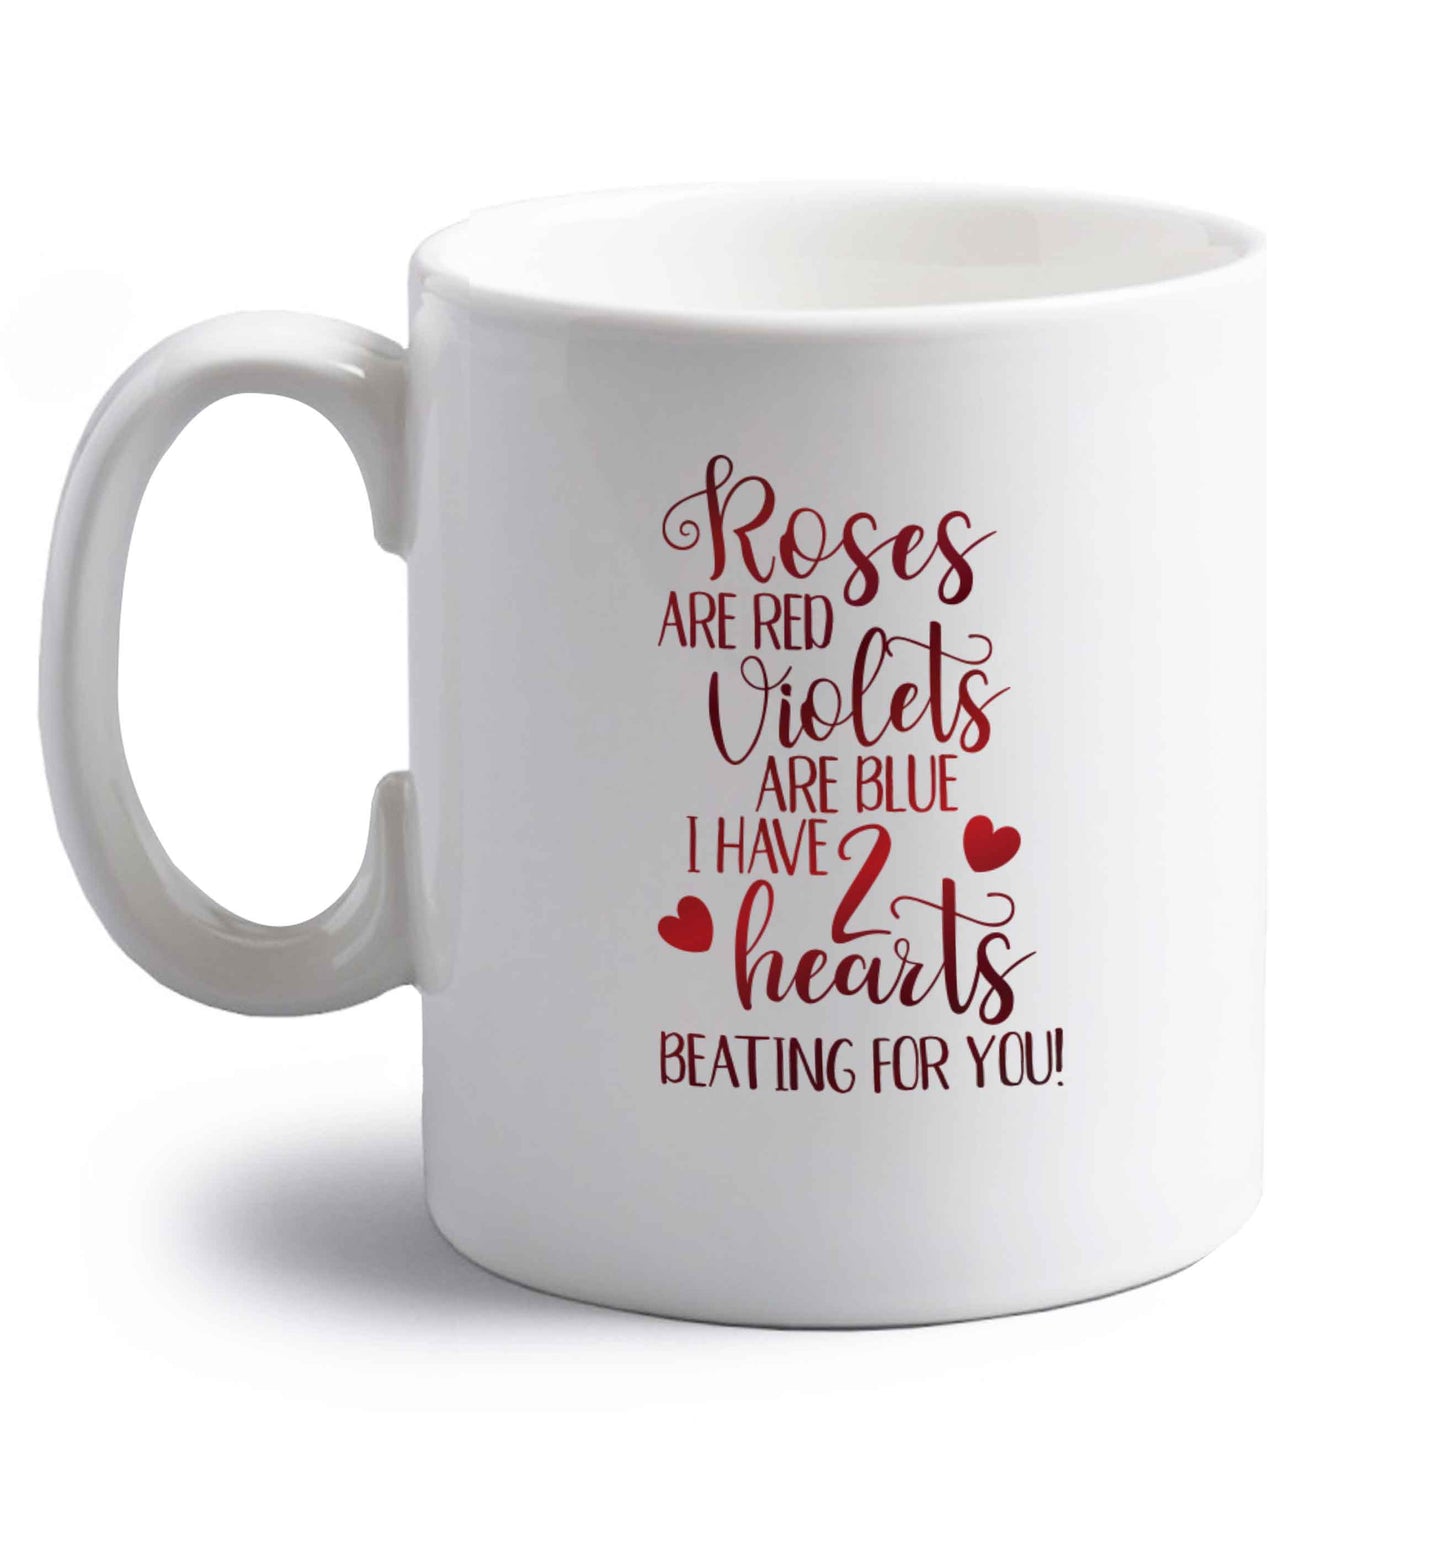 Roses are red violets are blue I have two hearts beating for you right handed white ceramic mug 